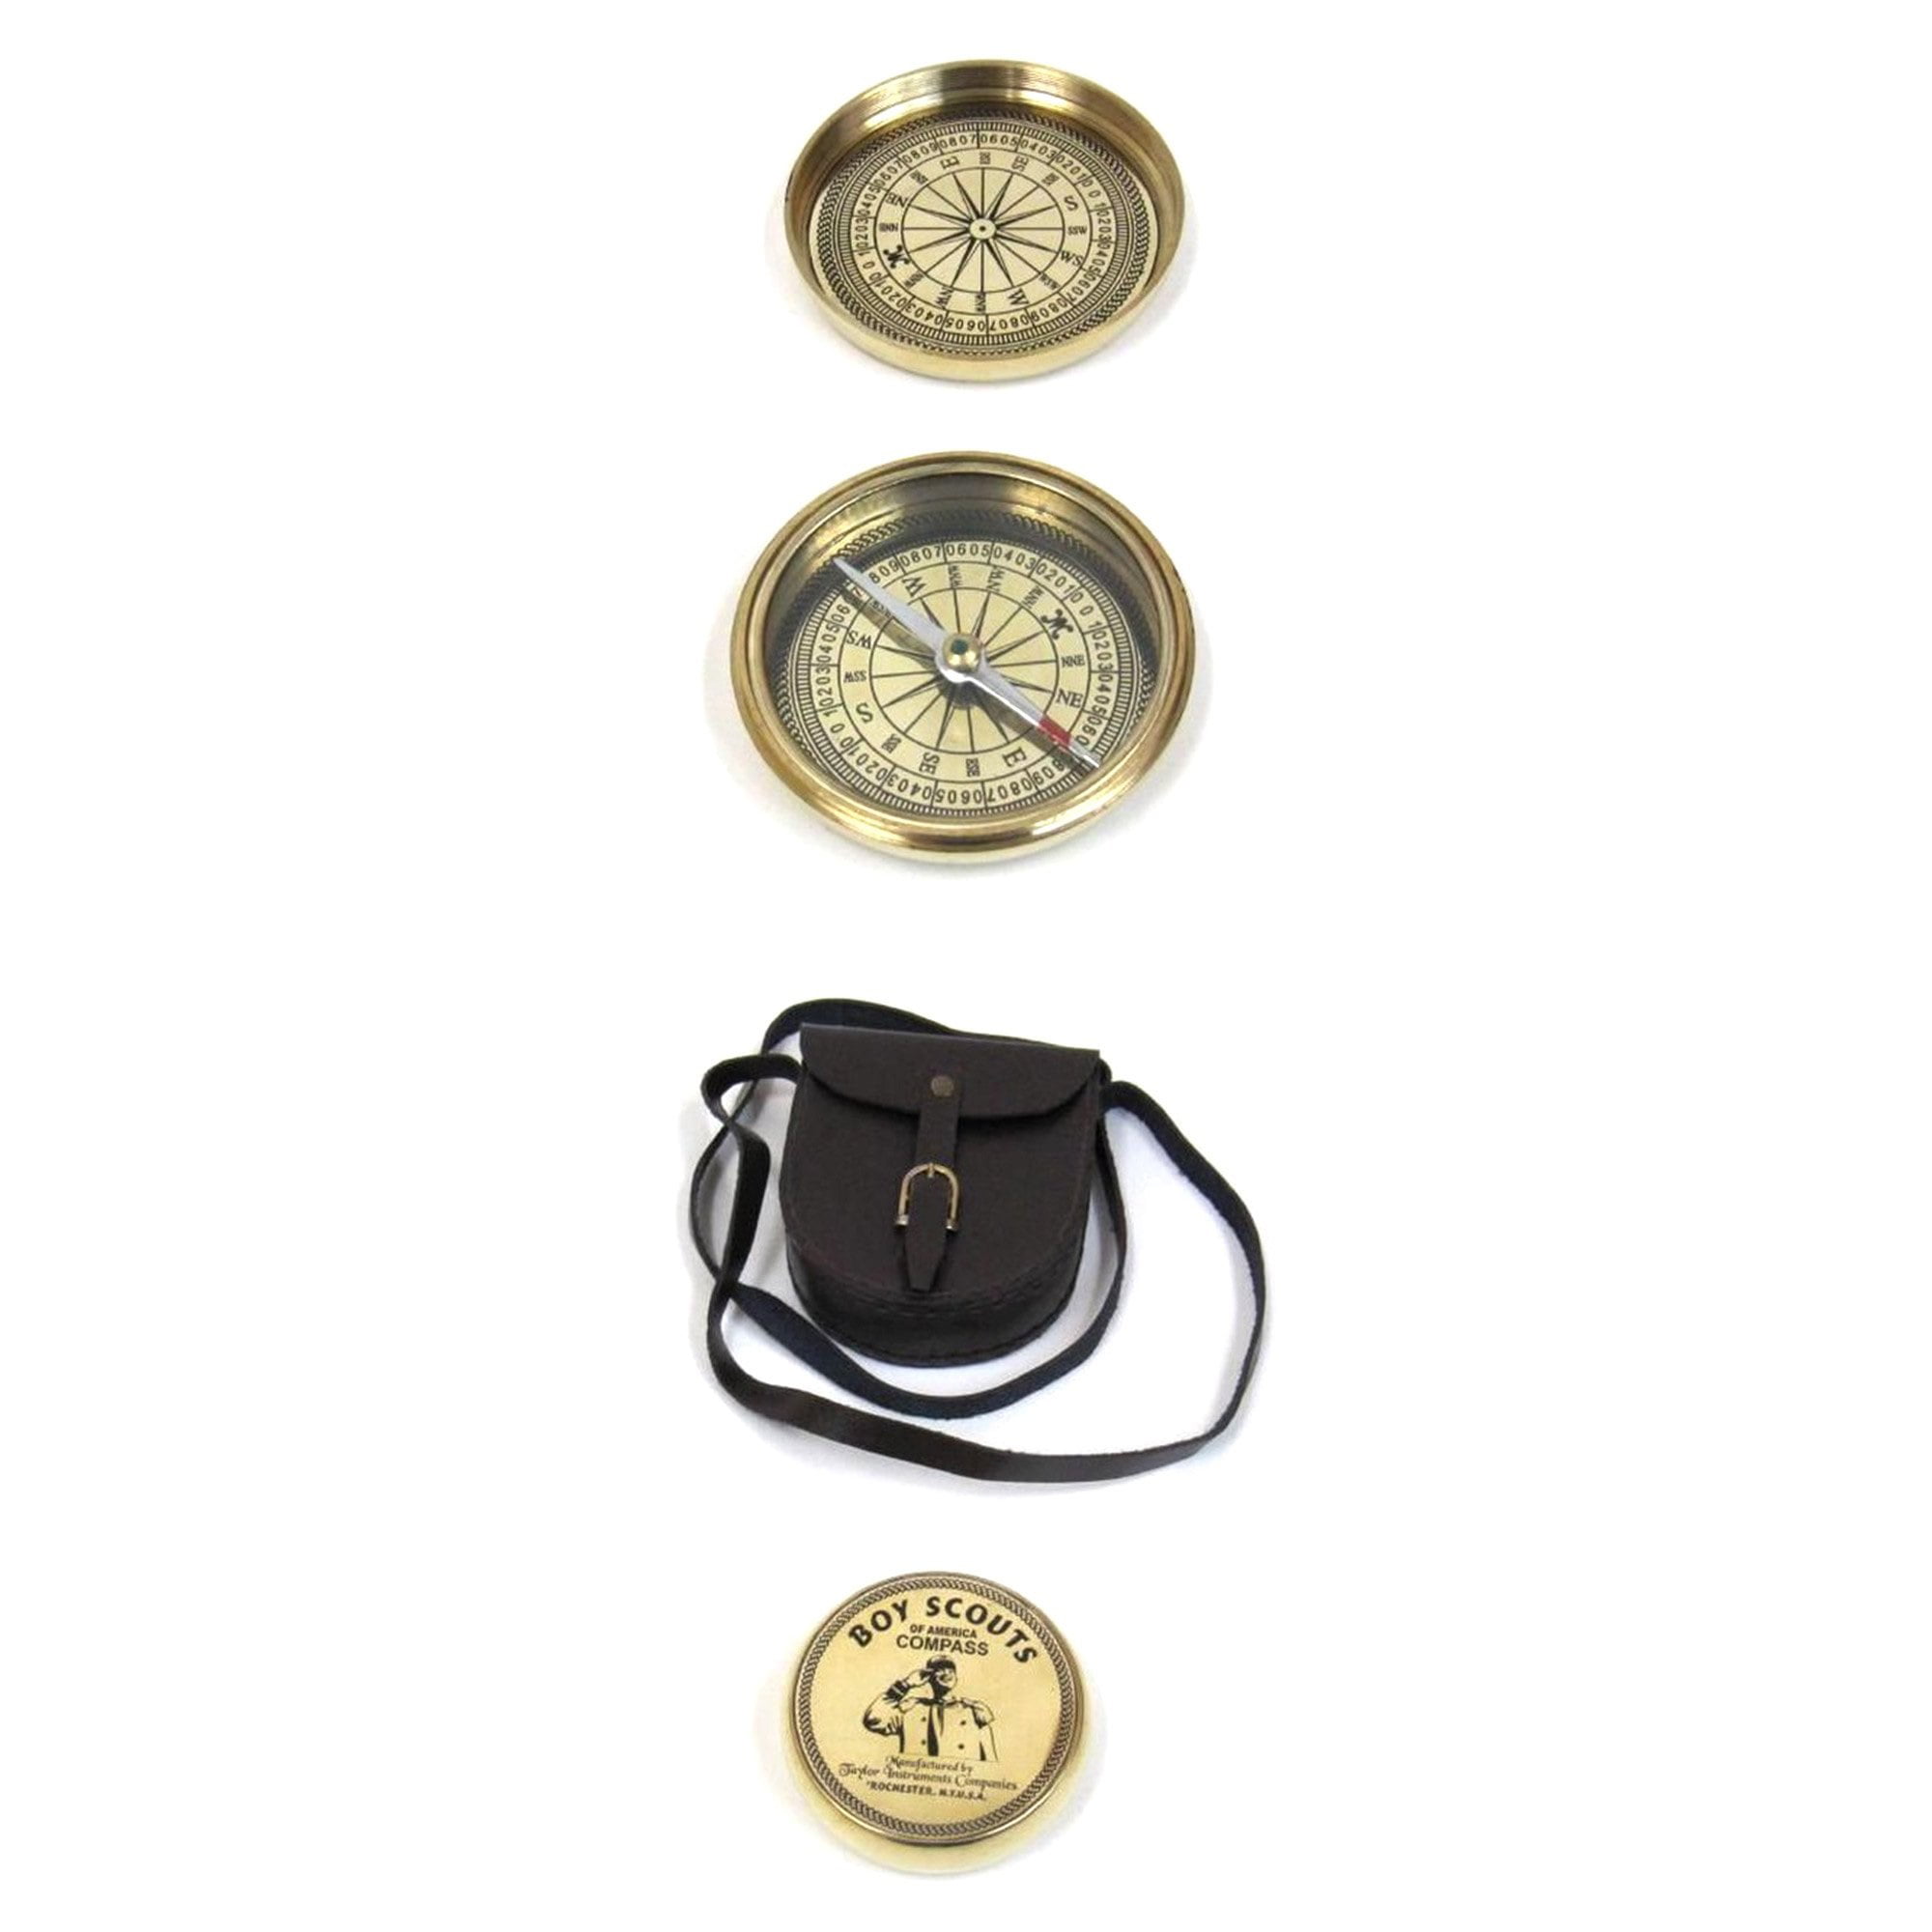 Vintage nautical brass compass boy scouts poem compass with leather case 